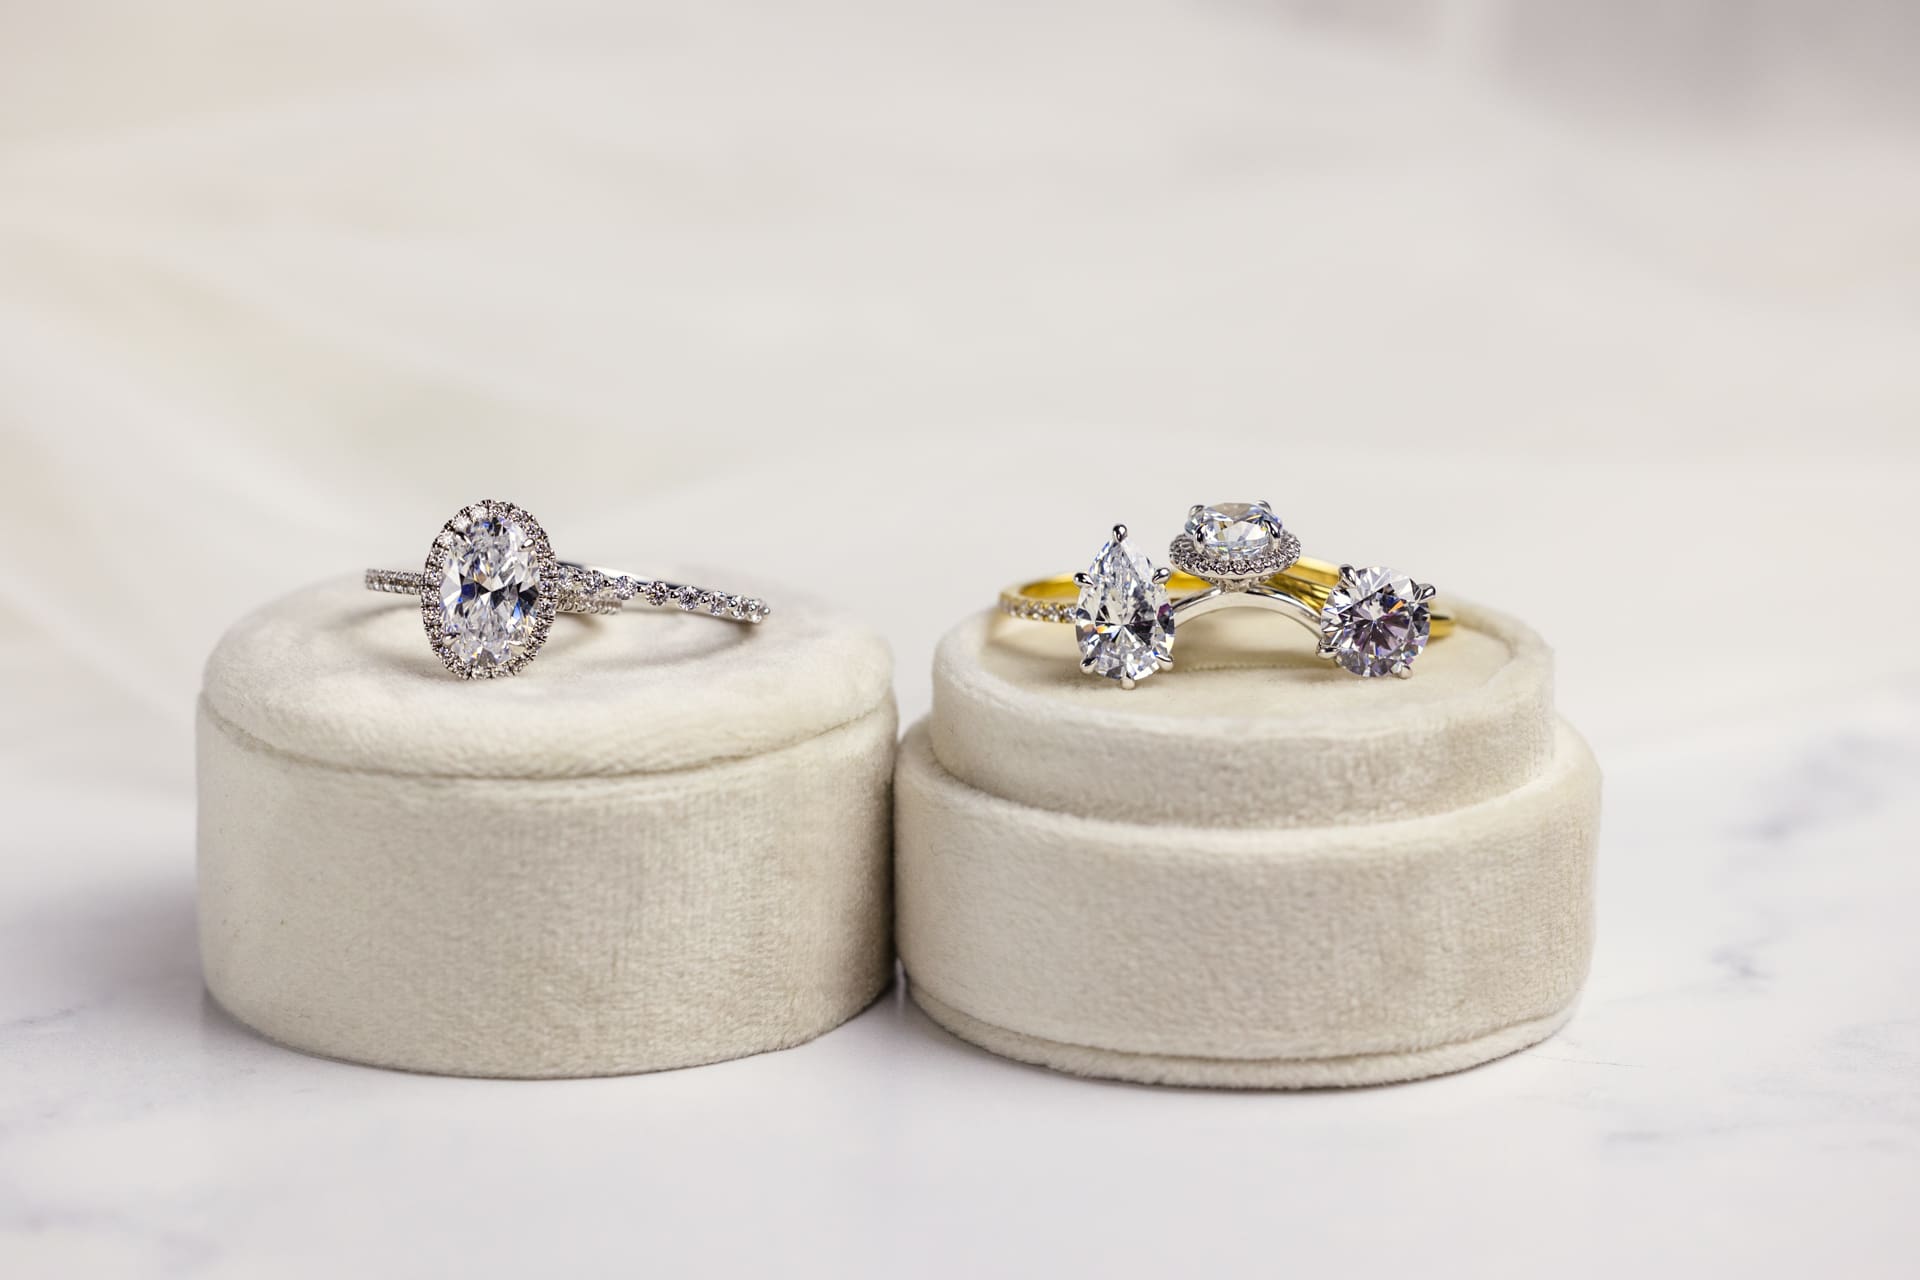 Diamond engagement rings and wedding bands in a variety of cuts sit on white velvet ring box on marble counter at Chicago photography studio P&M Studio